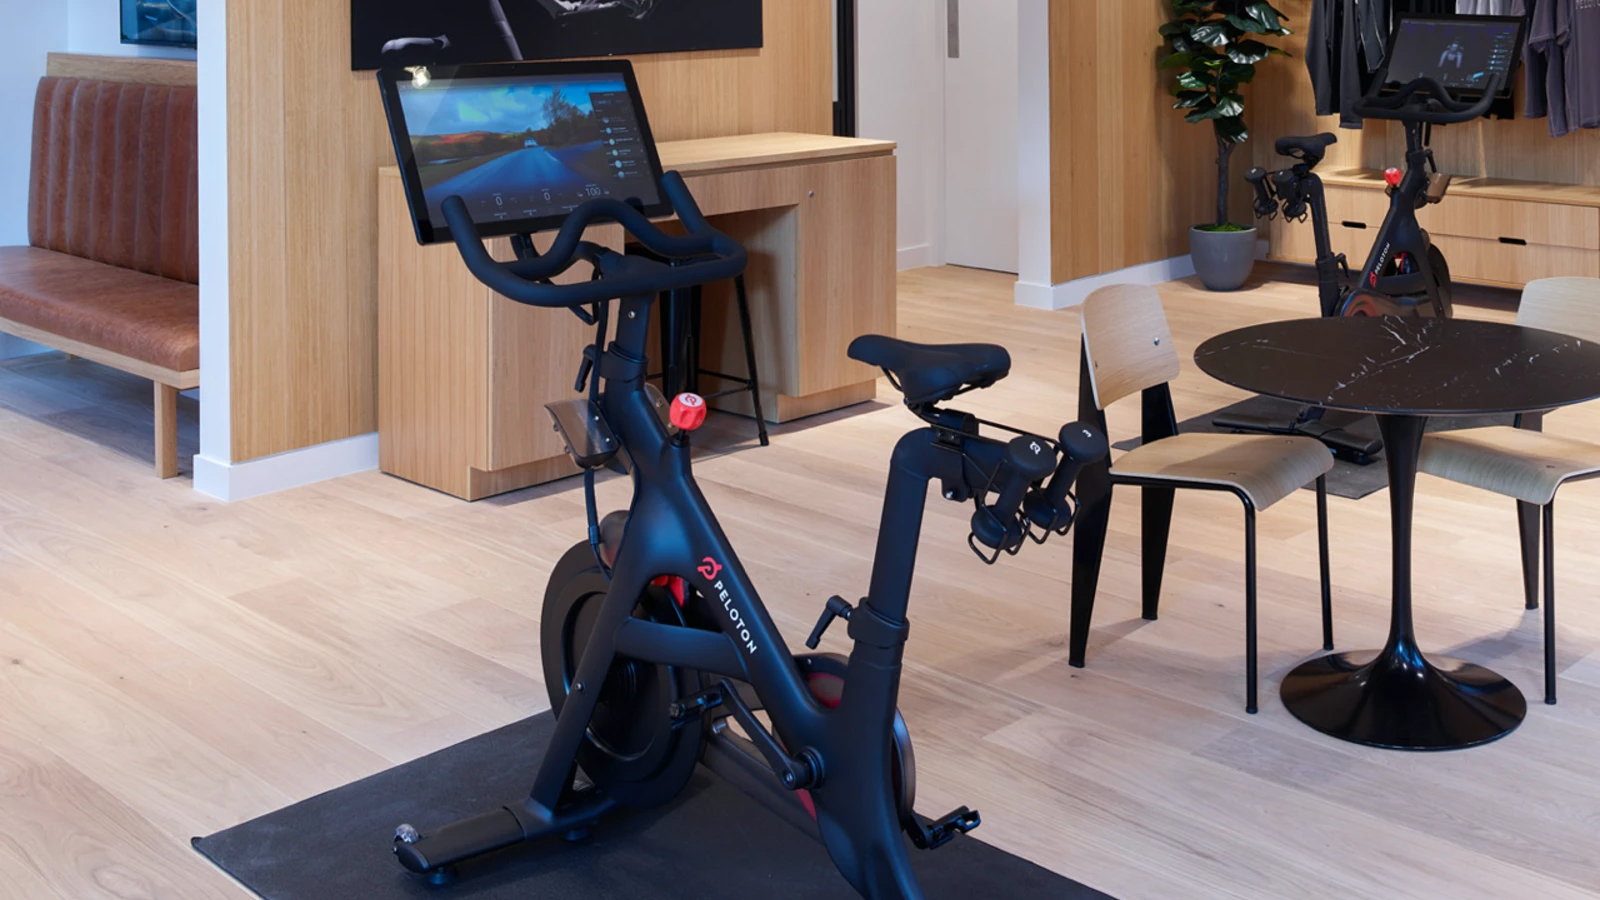 what makes peloton different